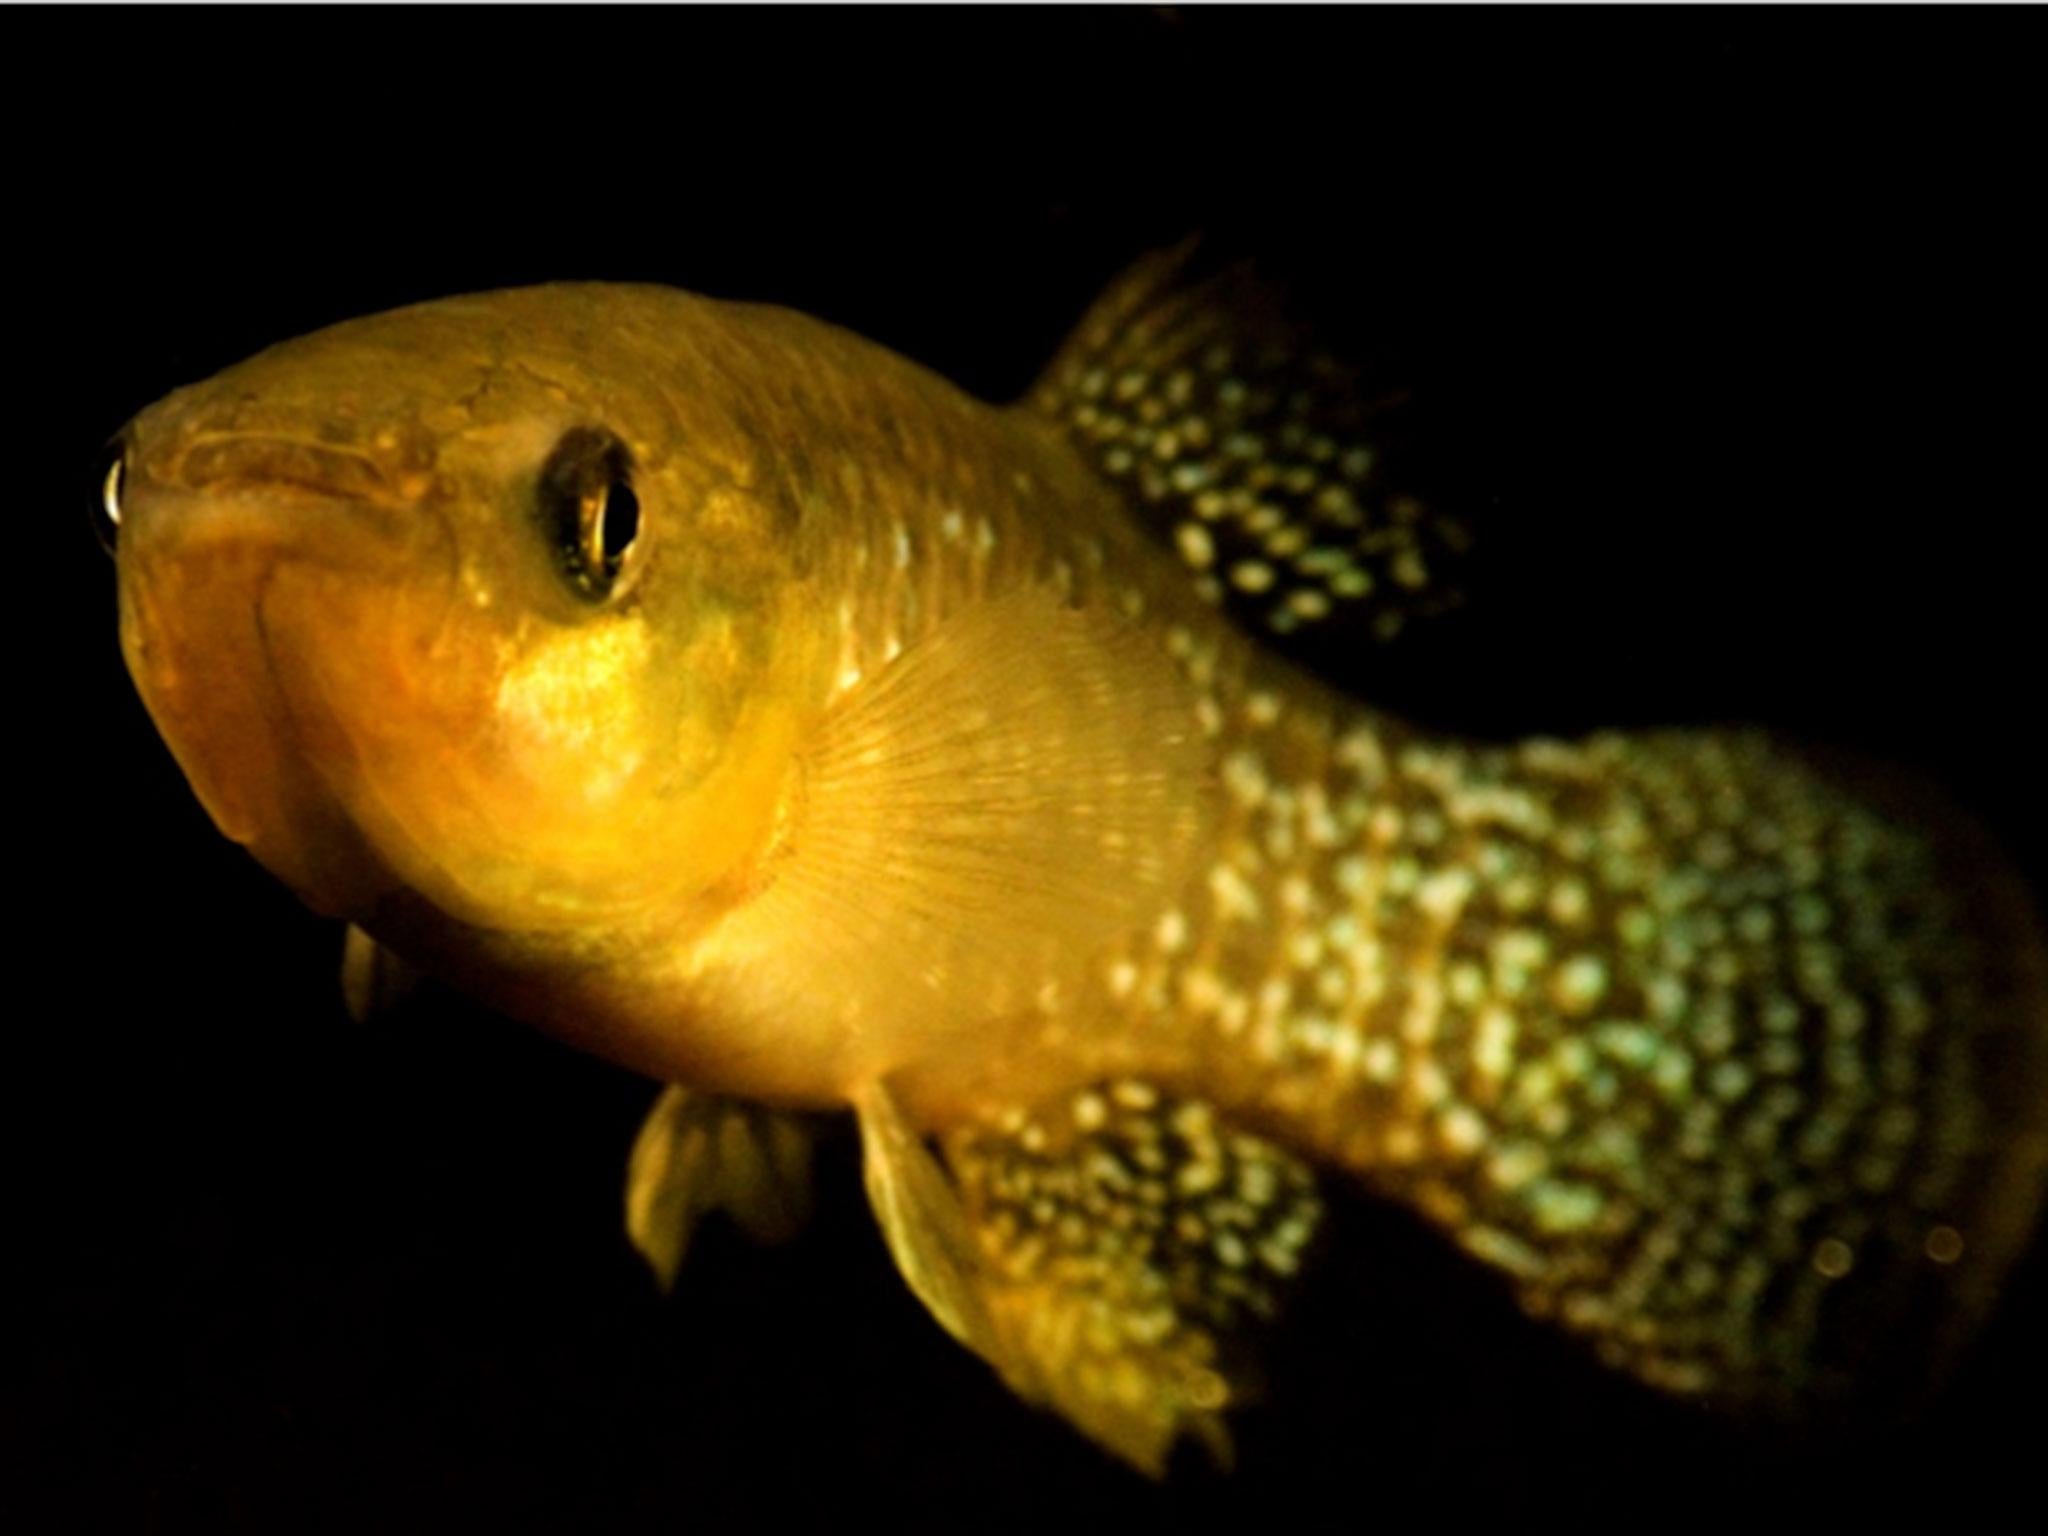 Atlantic killifish like this one have adapted to highly toxic levels of pollution